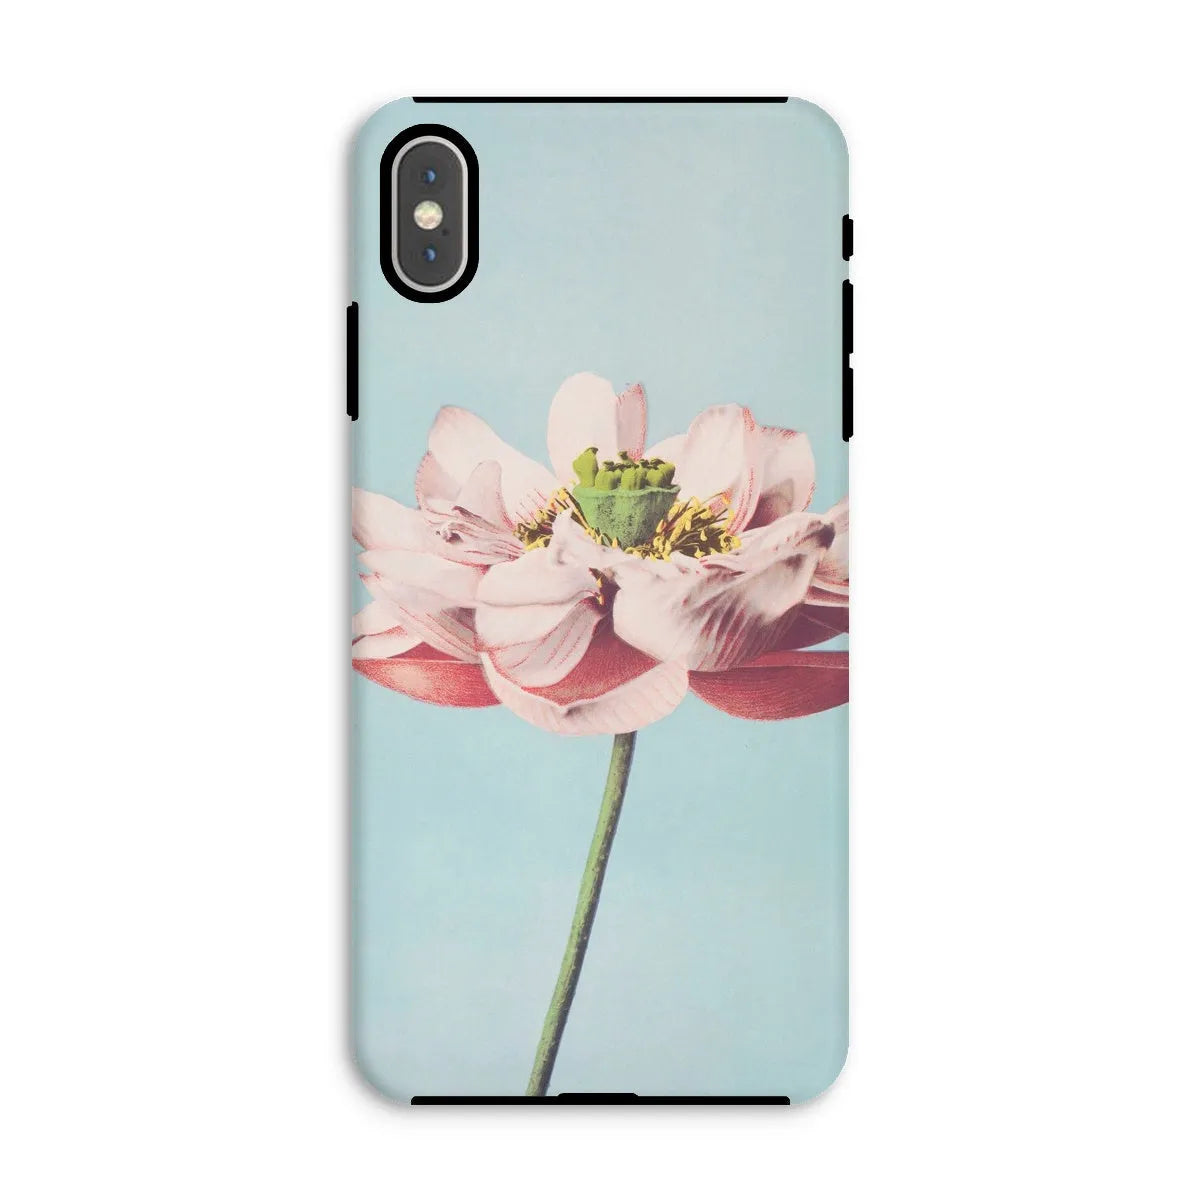 Pink Water Lily By Kazumasa Ogawa Art Phone Case - Iphone Xs Max / Matte - Mobile Phone Cases - Aesthetic Art